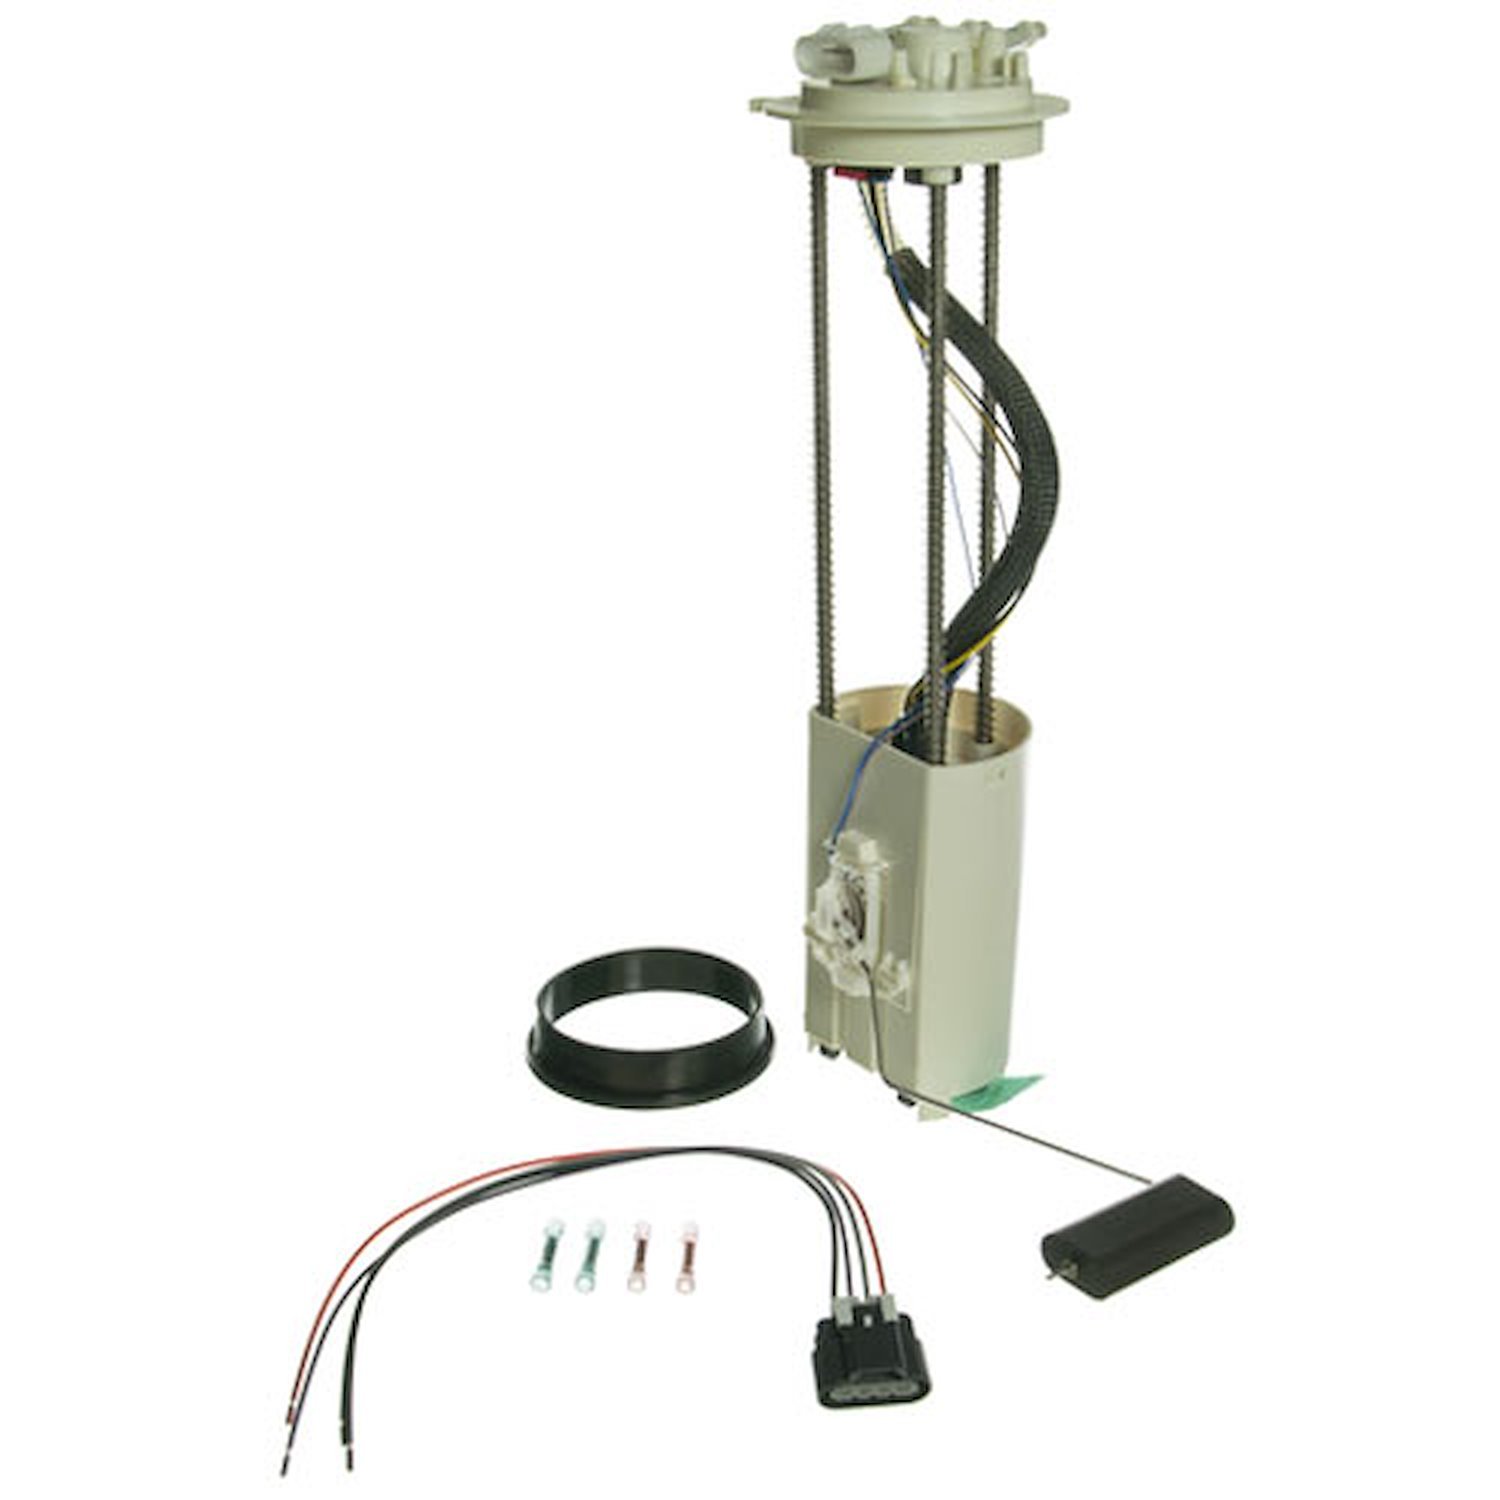 OE GM Replacement Electric Fuel Pump Module Assembly for 1999-2003 Chevy Silverado/GMC Sierra